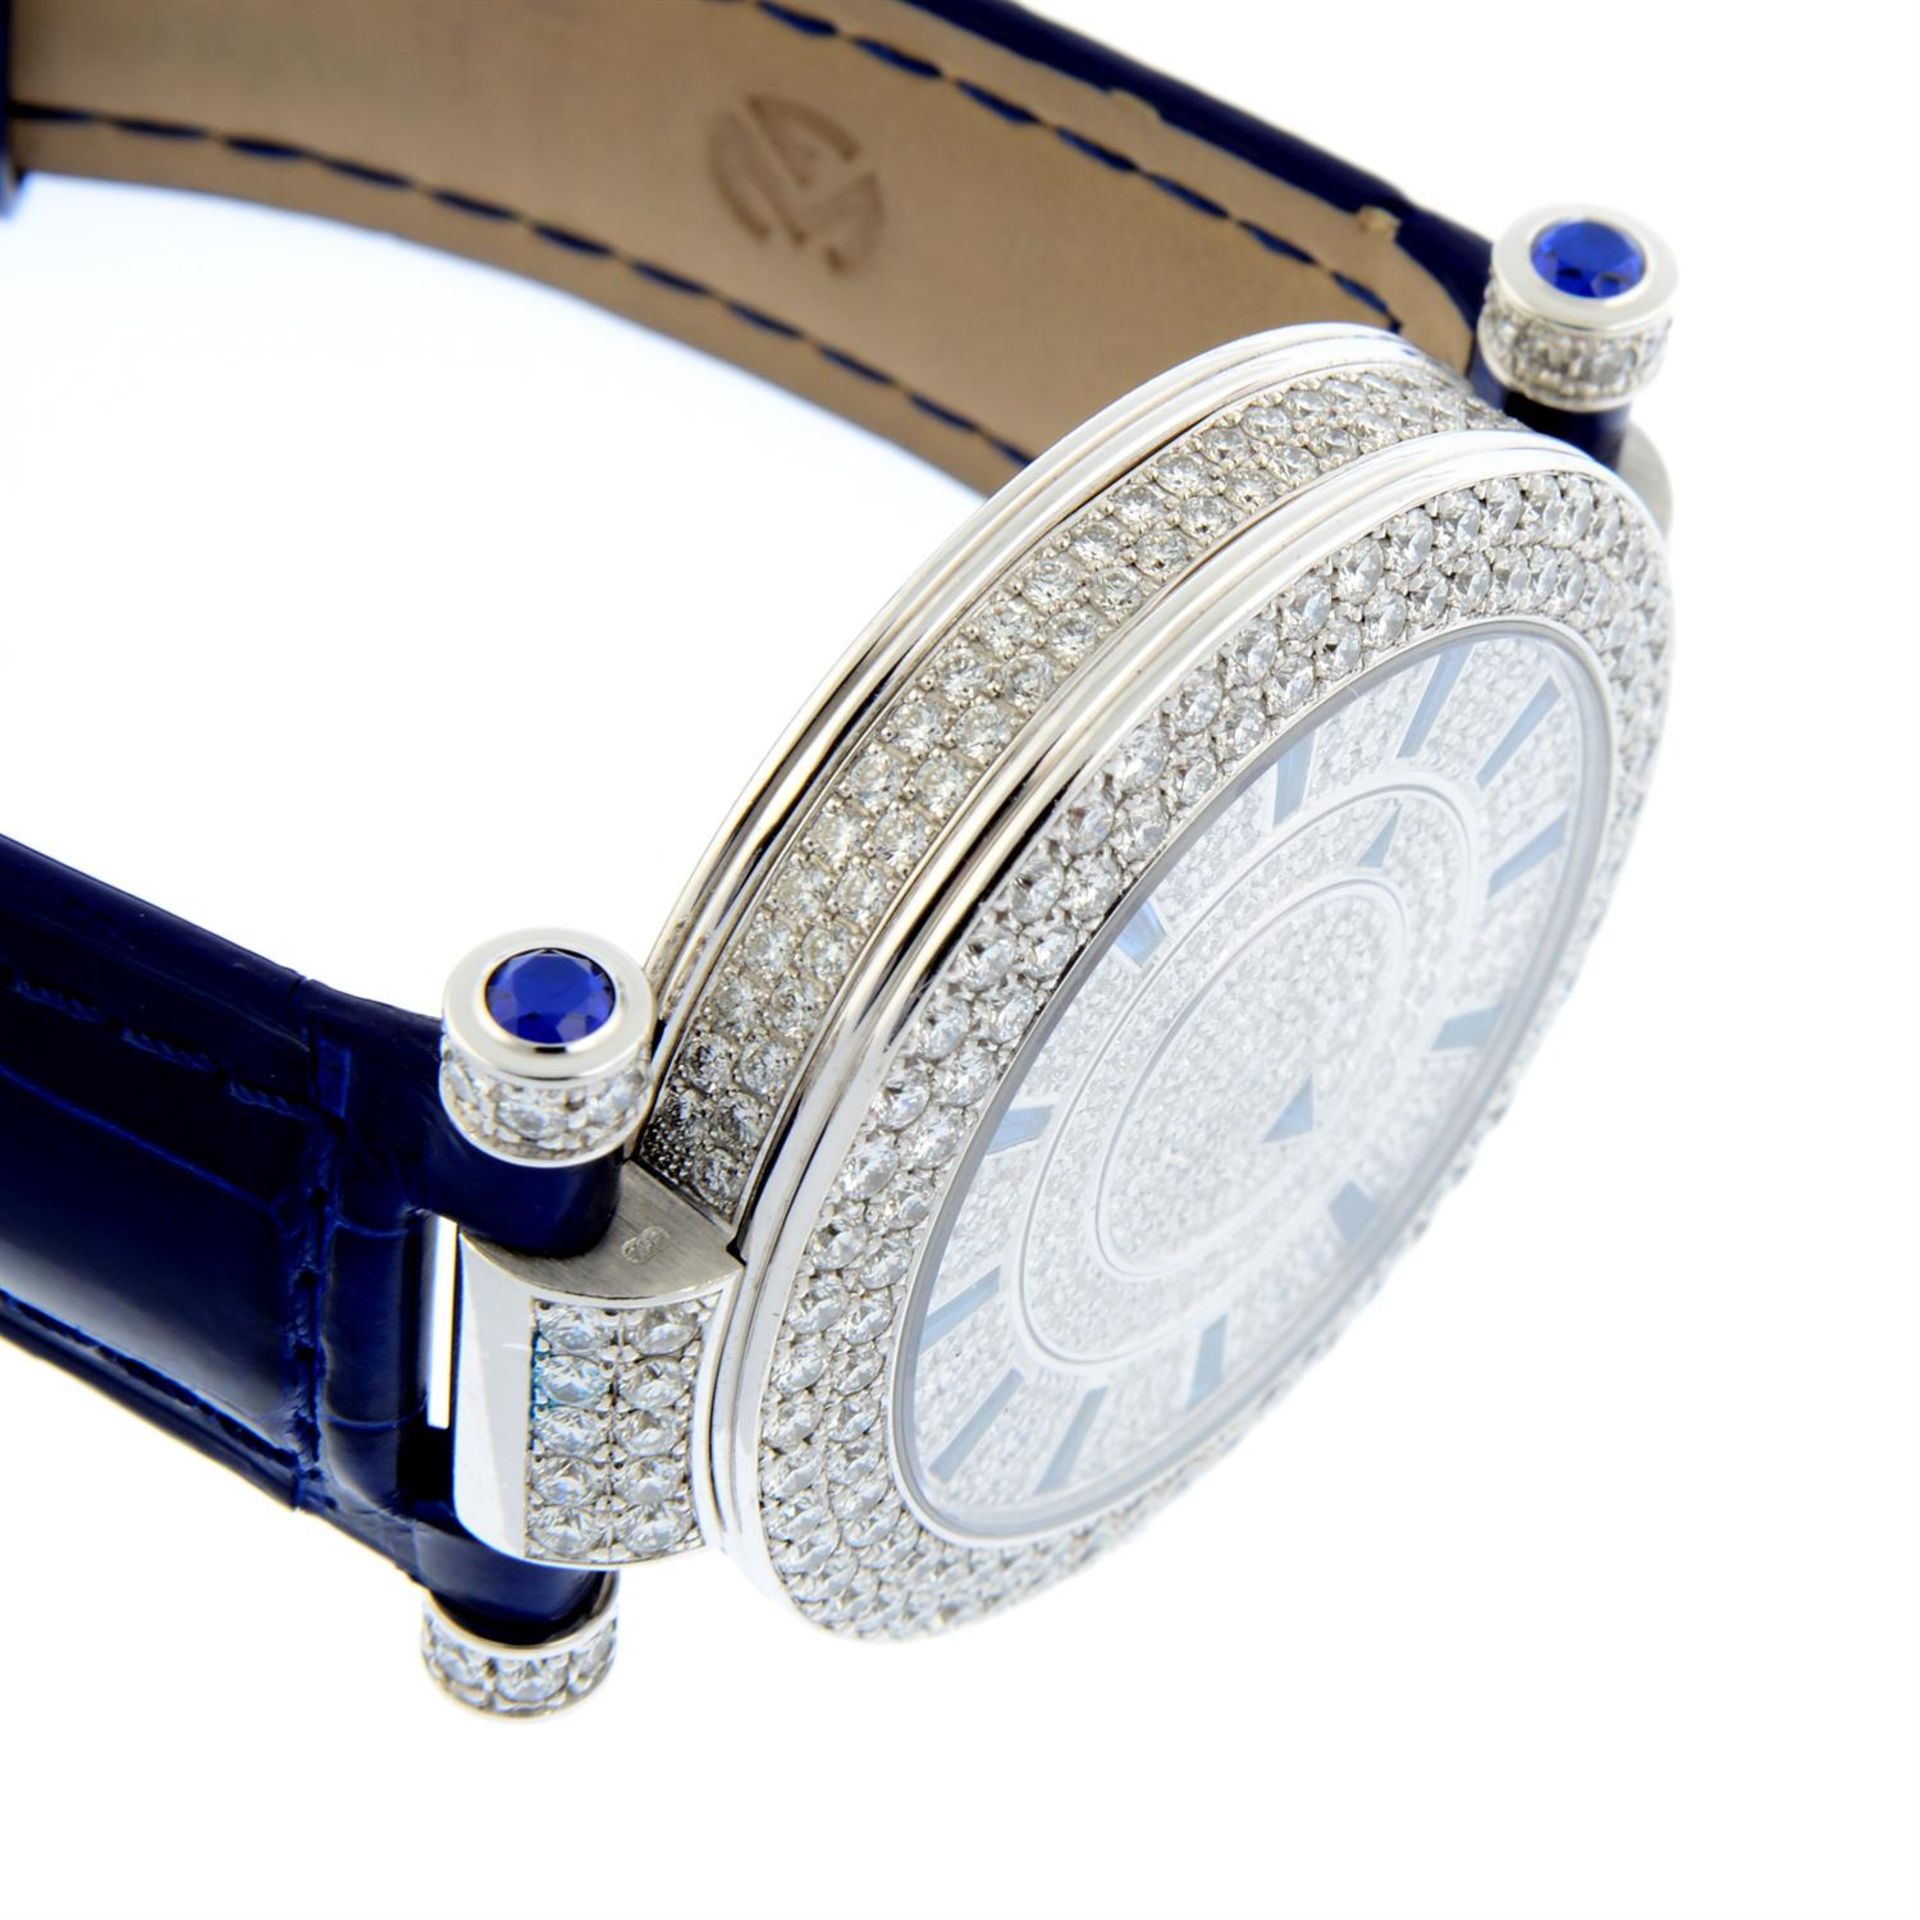 FRANCK MULLER - a factory diamond set 18ct white gold Double Mystery wrist watch, 39mm. - Image 4 of 6